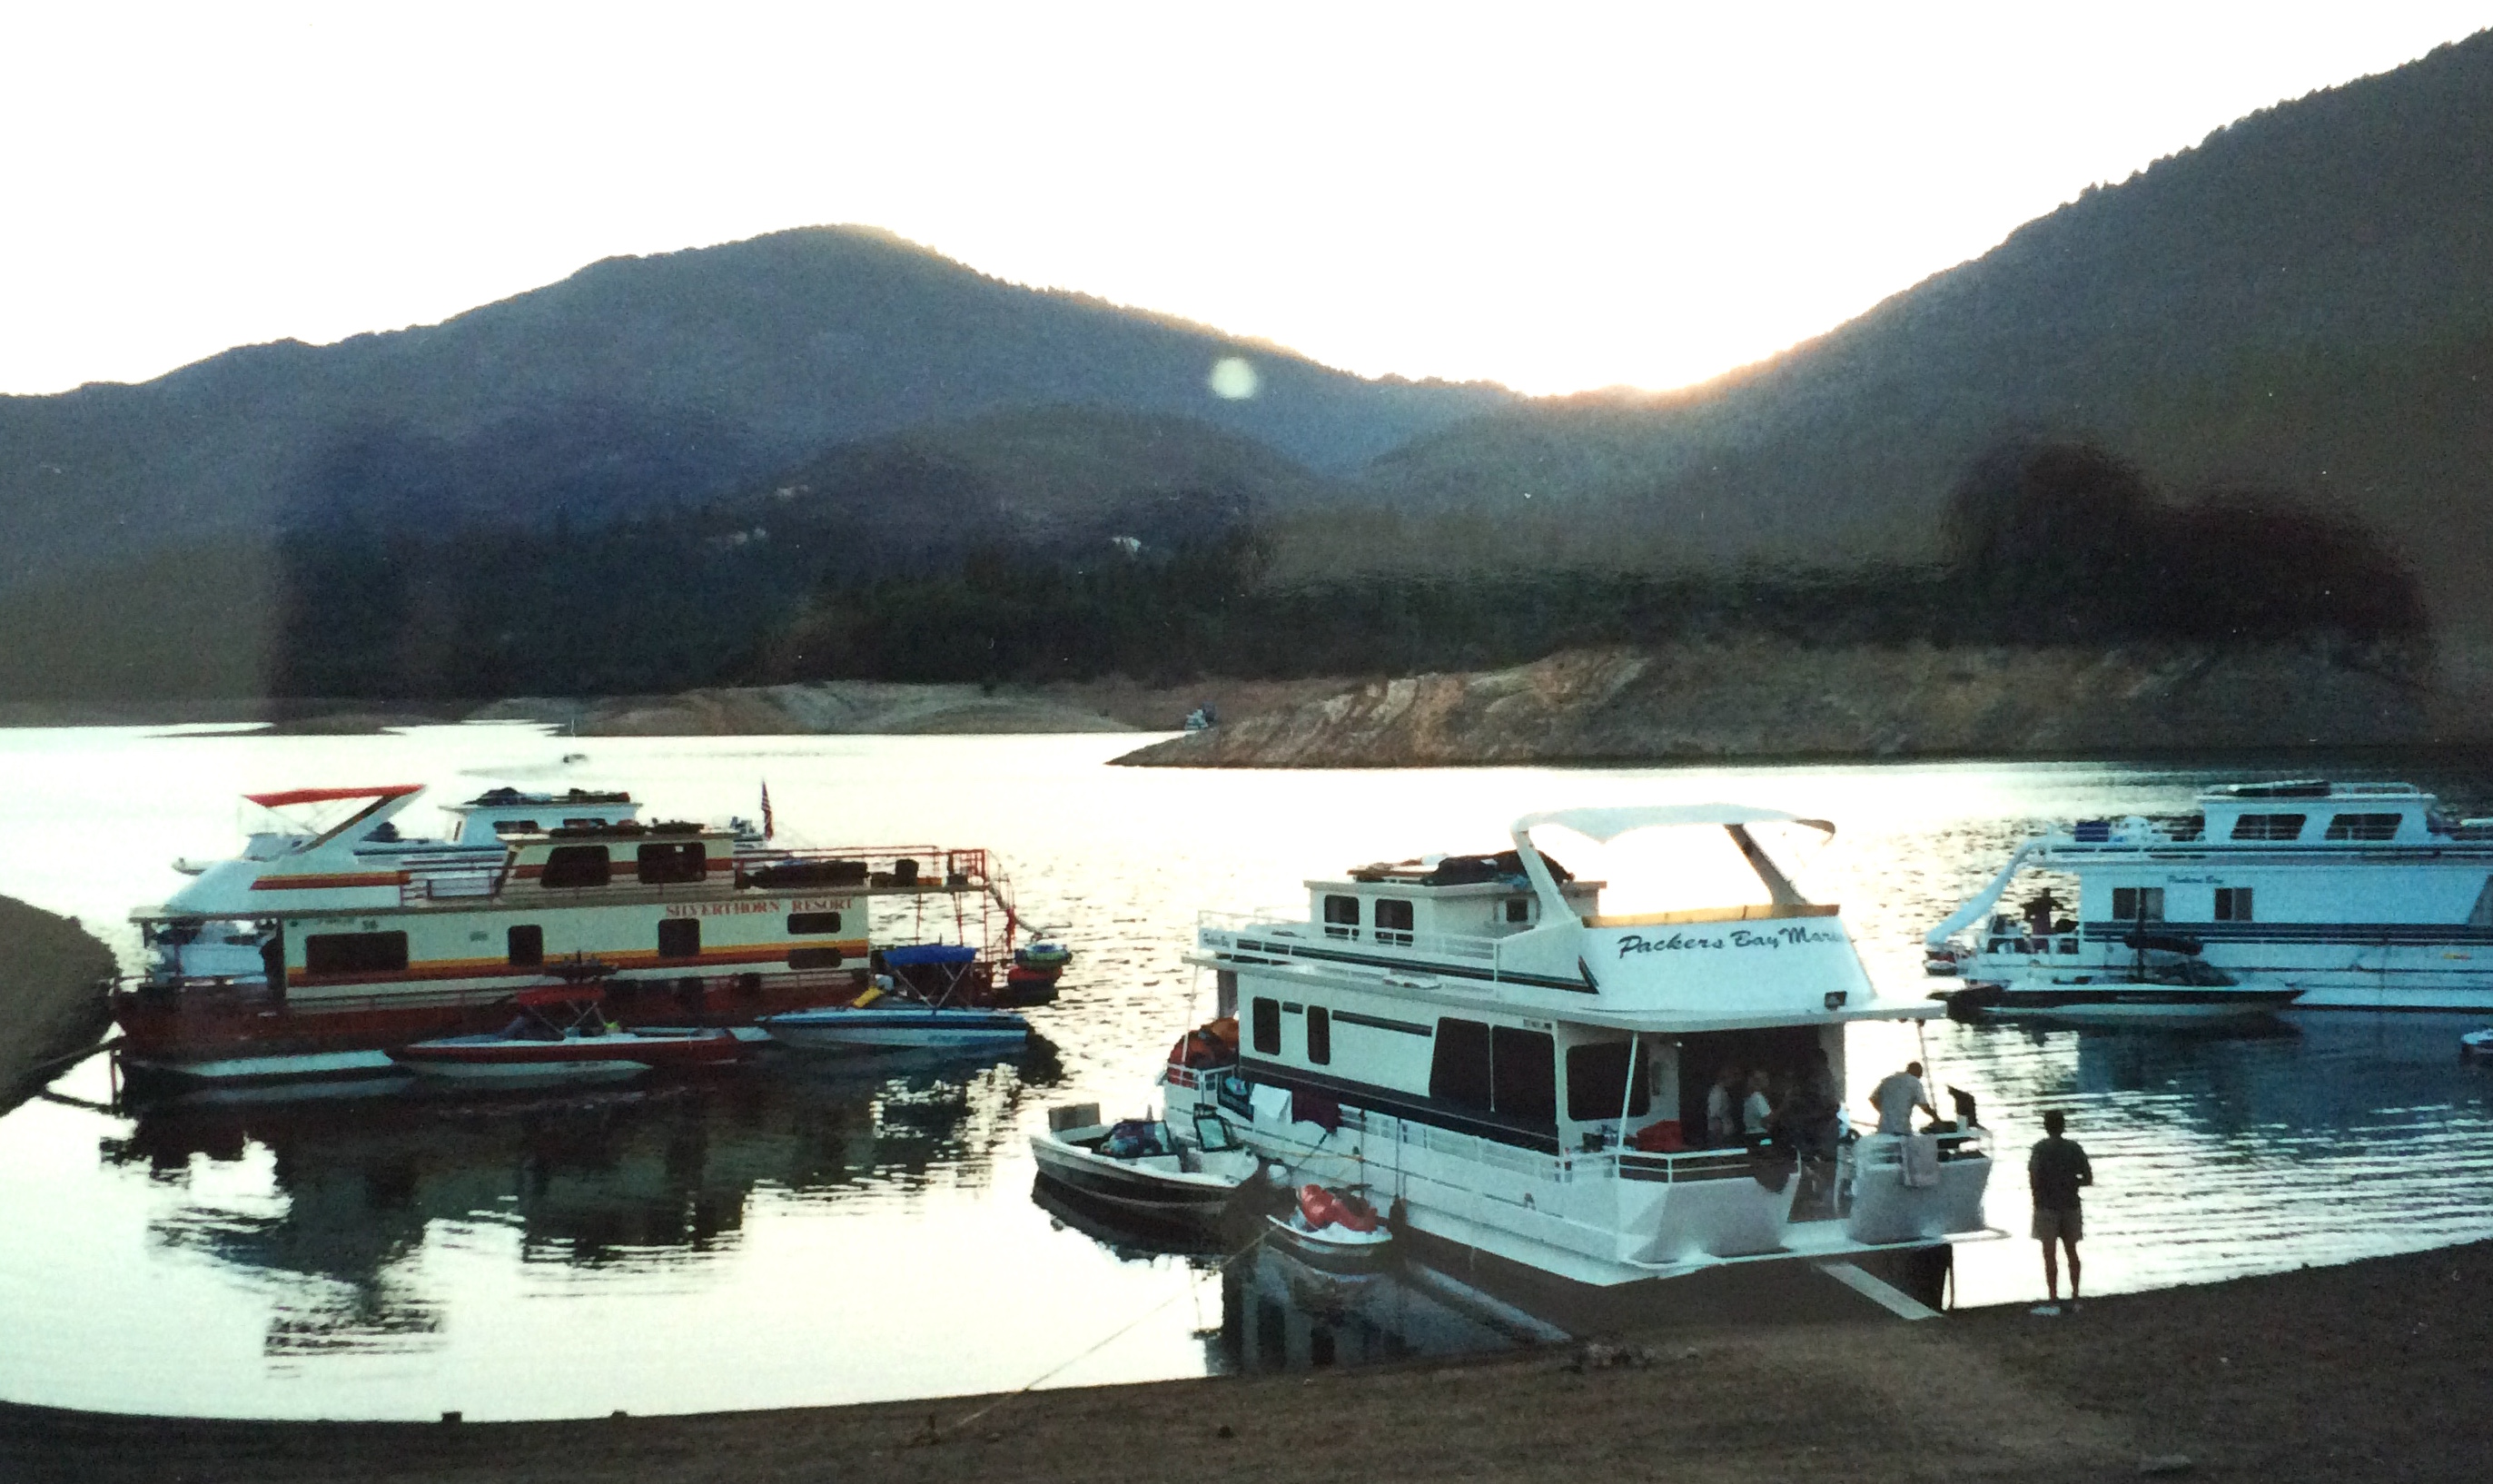 For years my family did annual houseboat trips to Lake Shasta with other close friends. Nothing beats finding your own little cove and hanging out for days-on end right on the water. This was circa 1999.